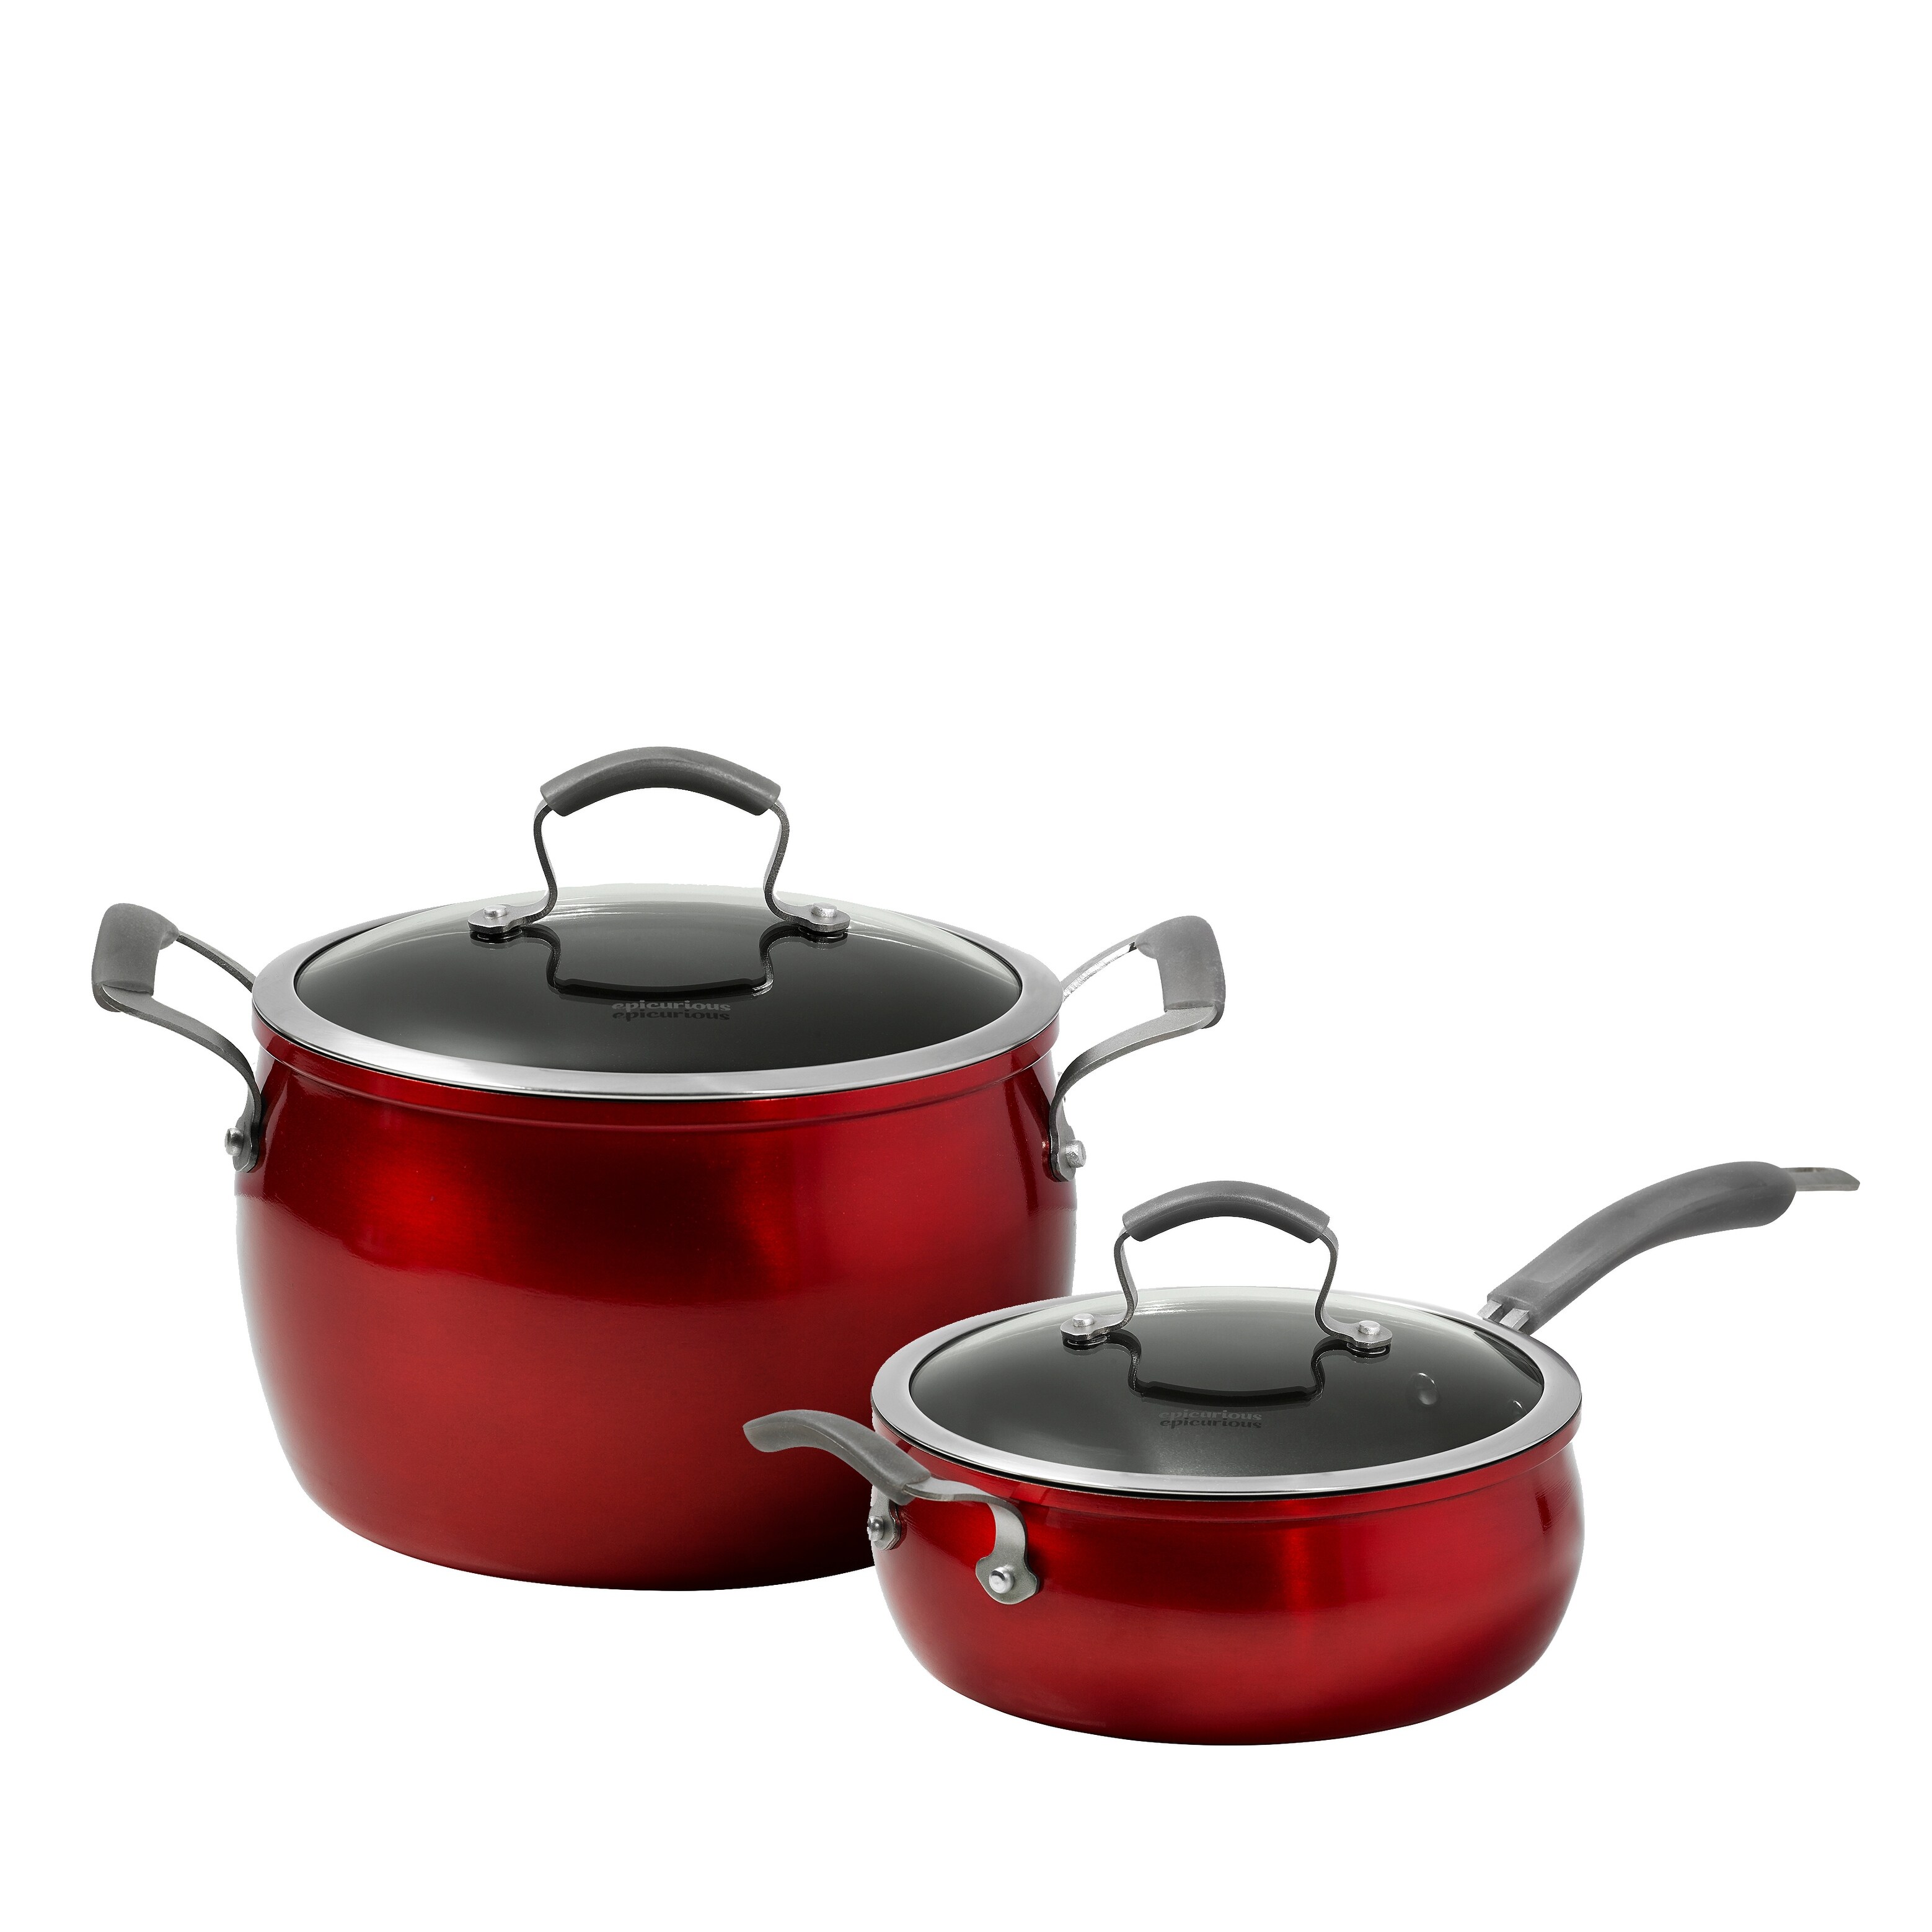 11-PIECE SHINY RED EPICURIOUS COOKWARE - household items - by